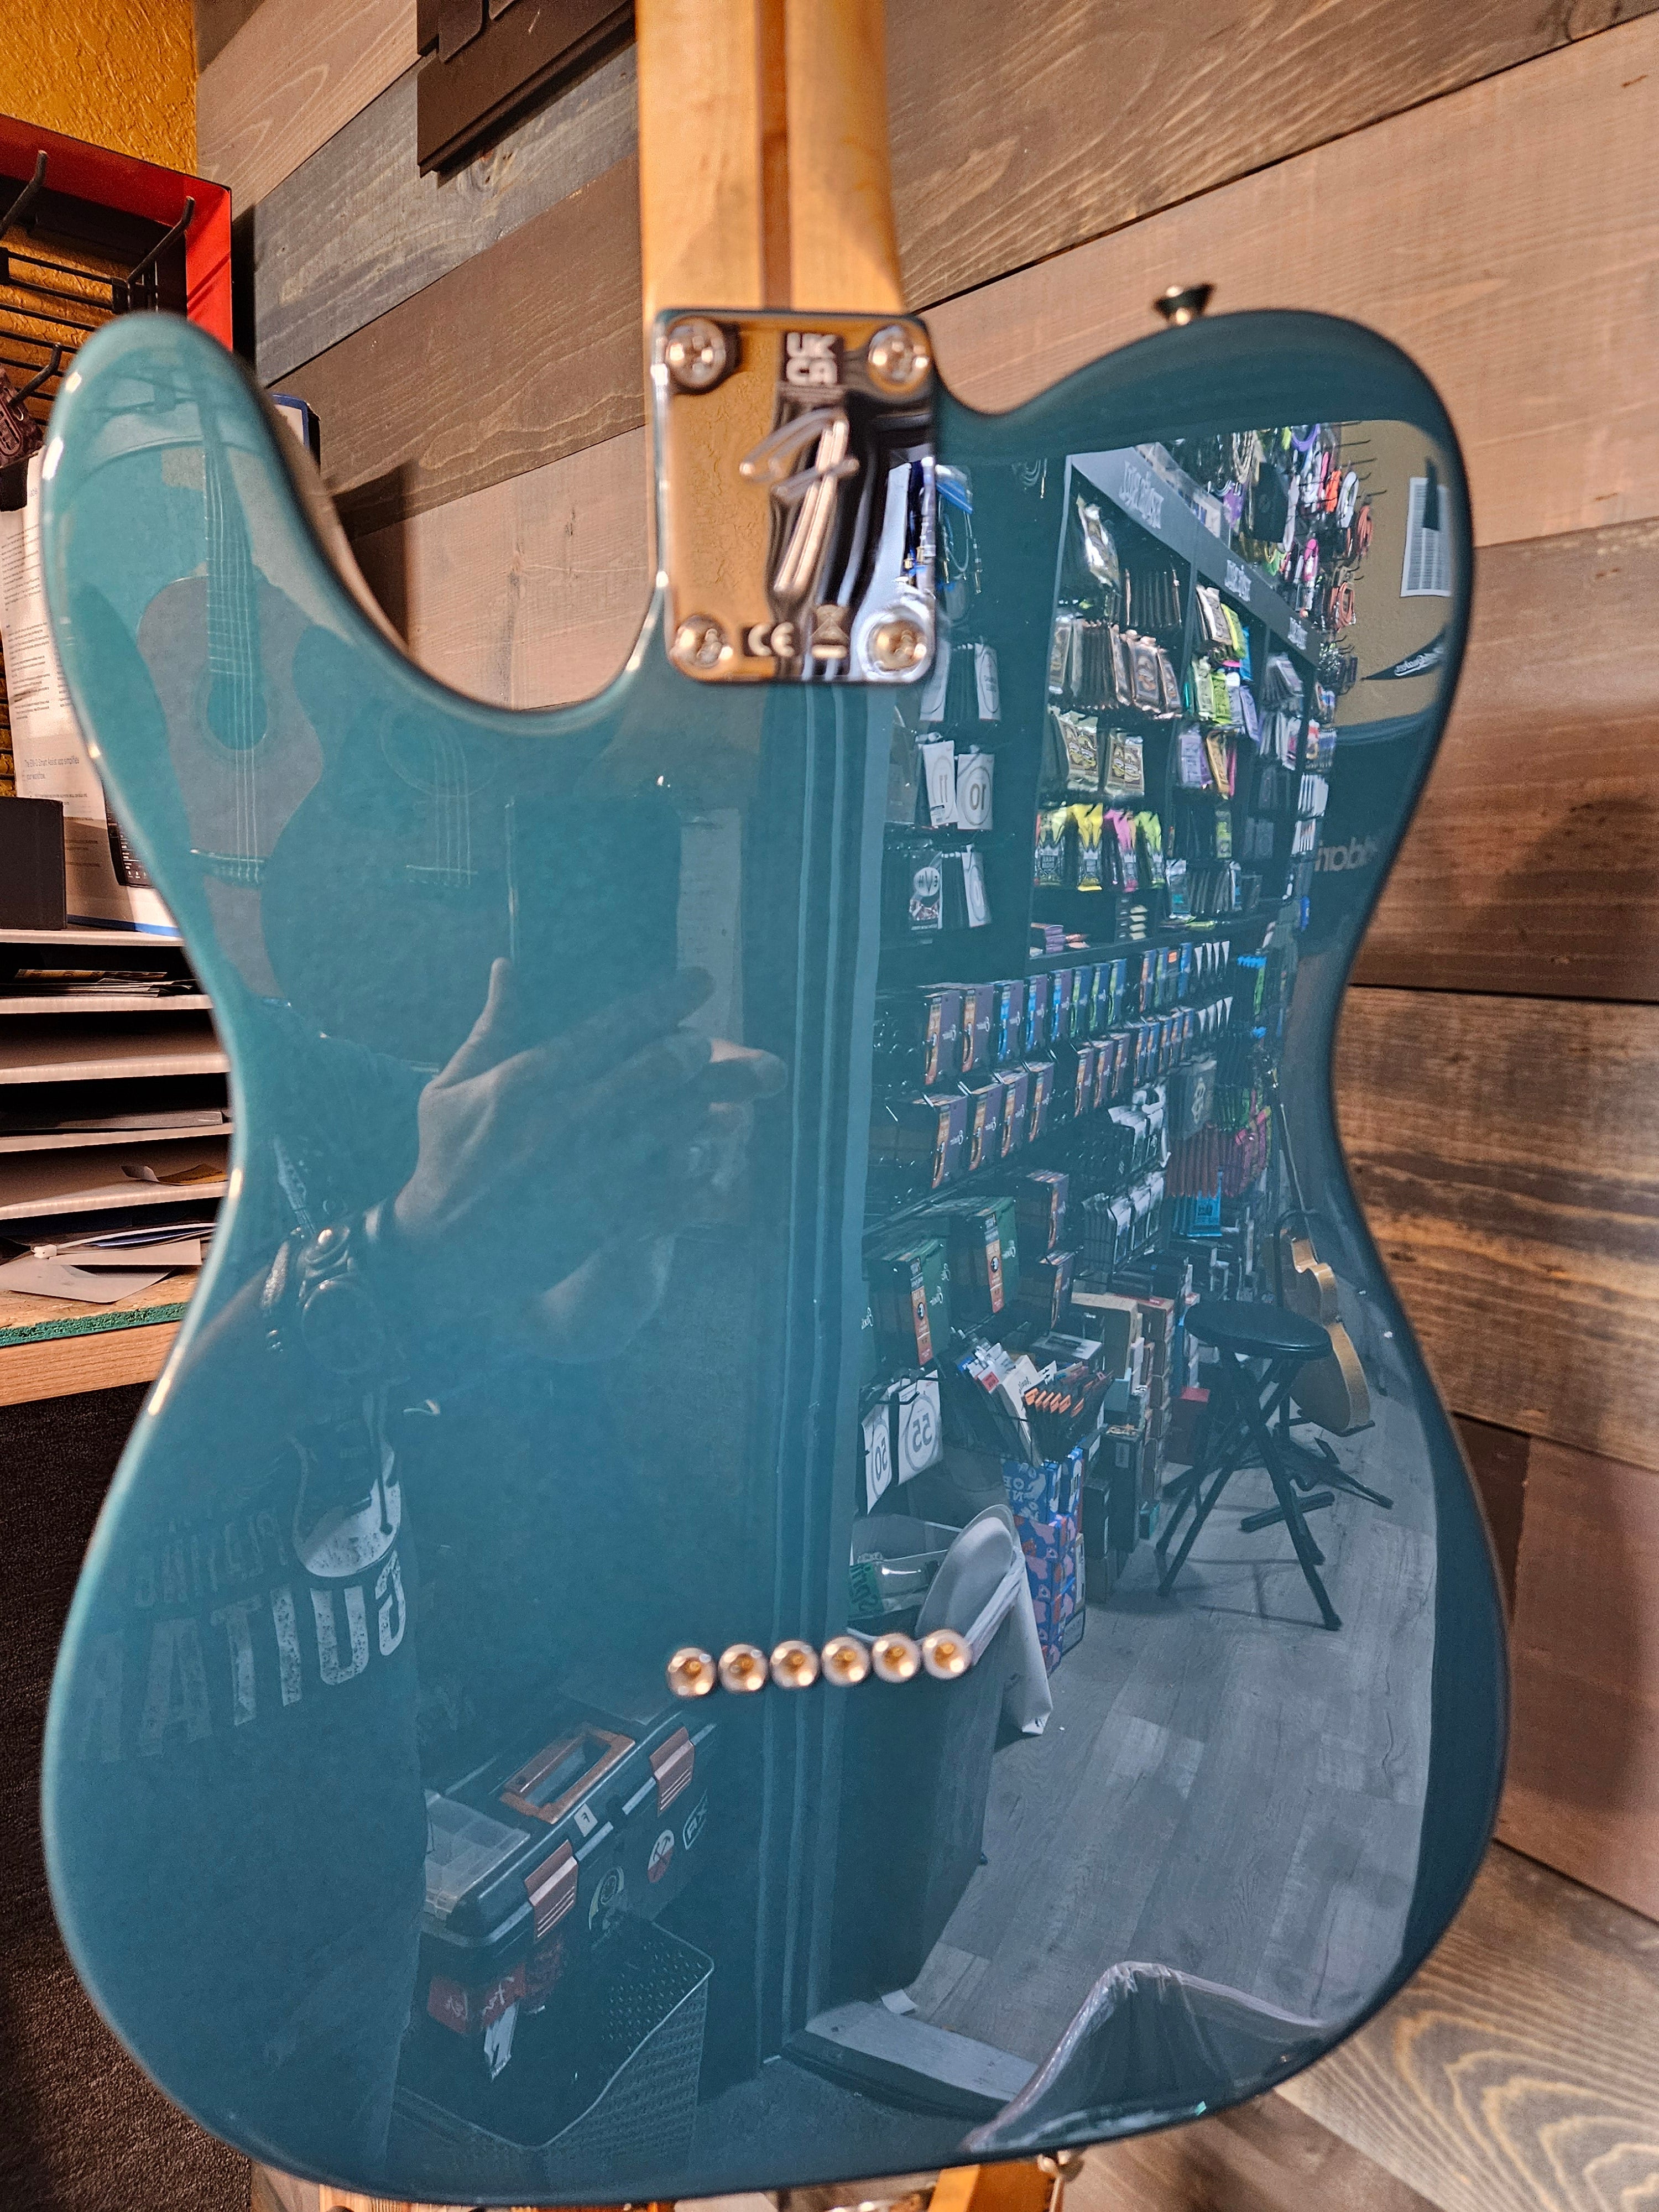 USED 2019 Limited Edition Player Telecaster®, Maple Fingerboard, Ocean Turquoise